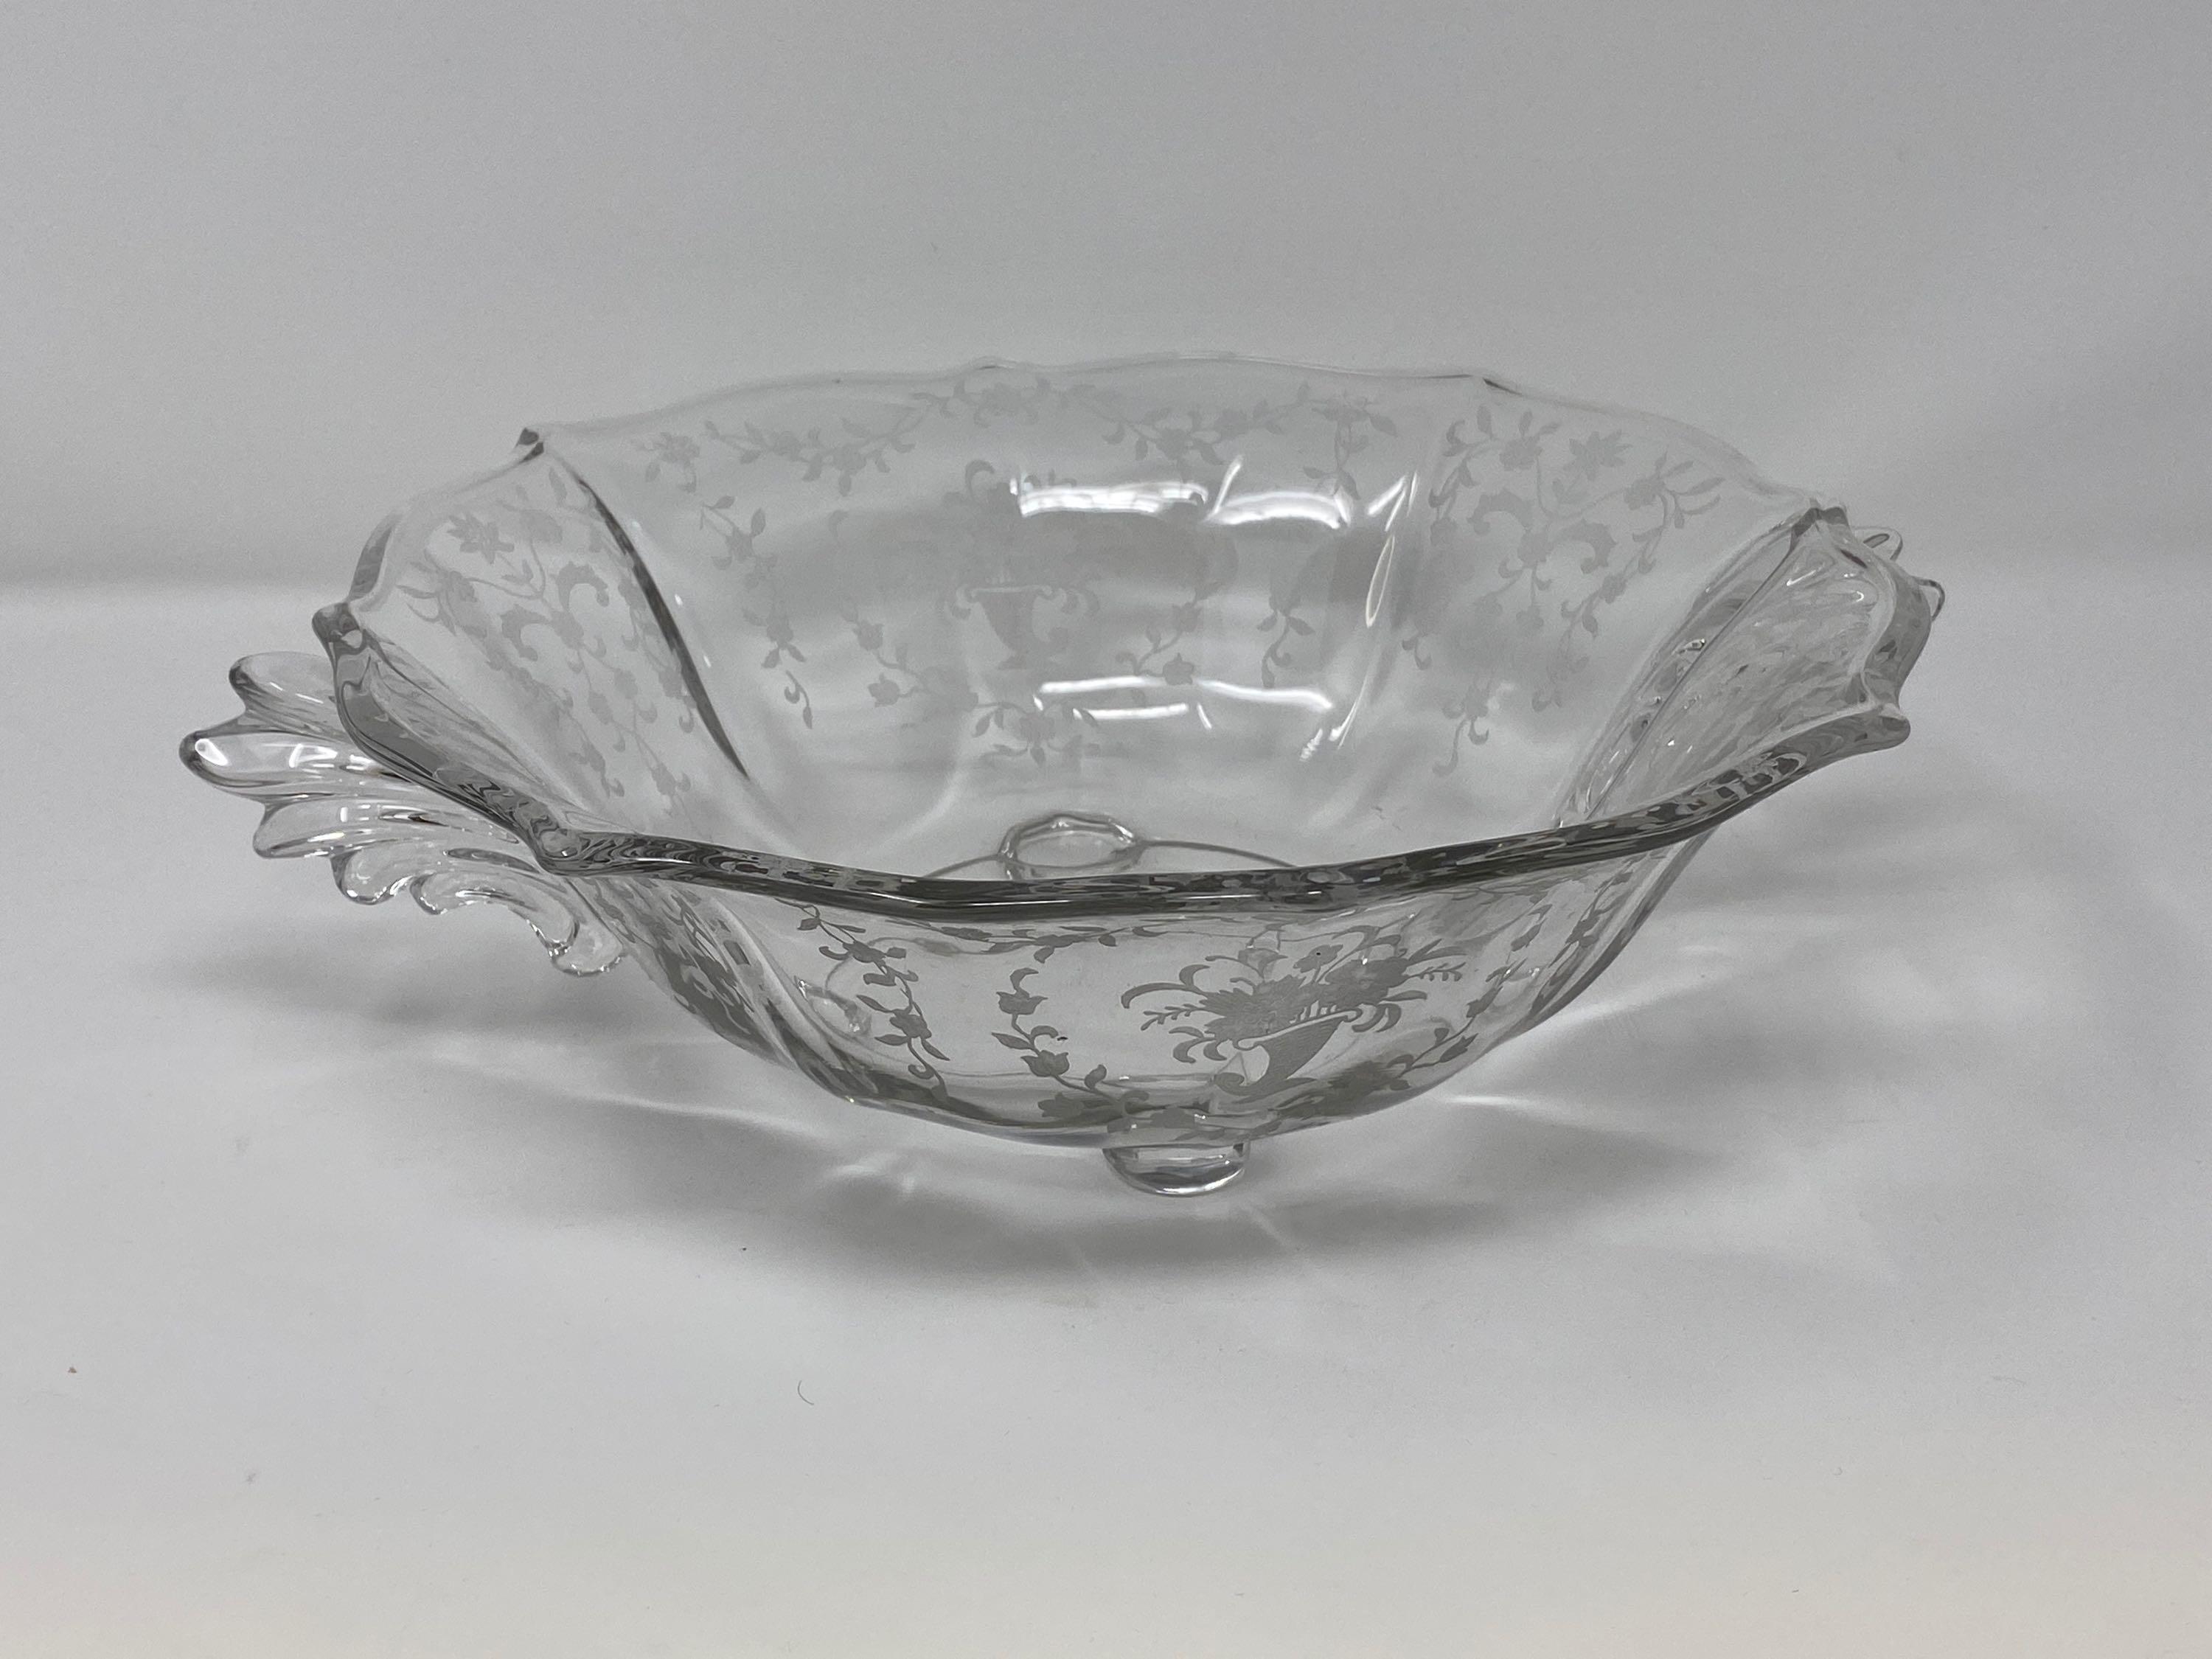 2 Glass Footed Bowls- One with Silver Overlay, Other with Etched Design